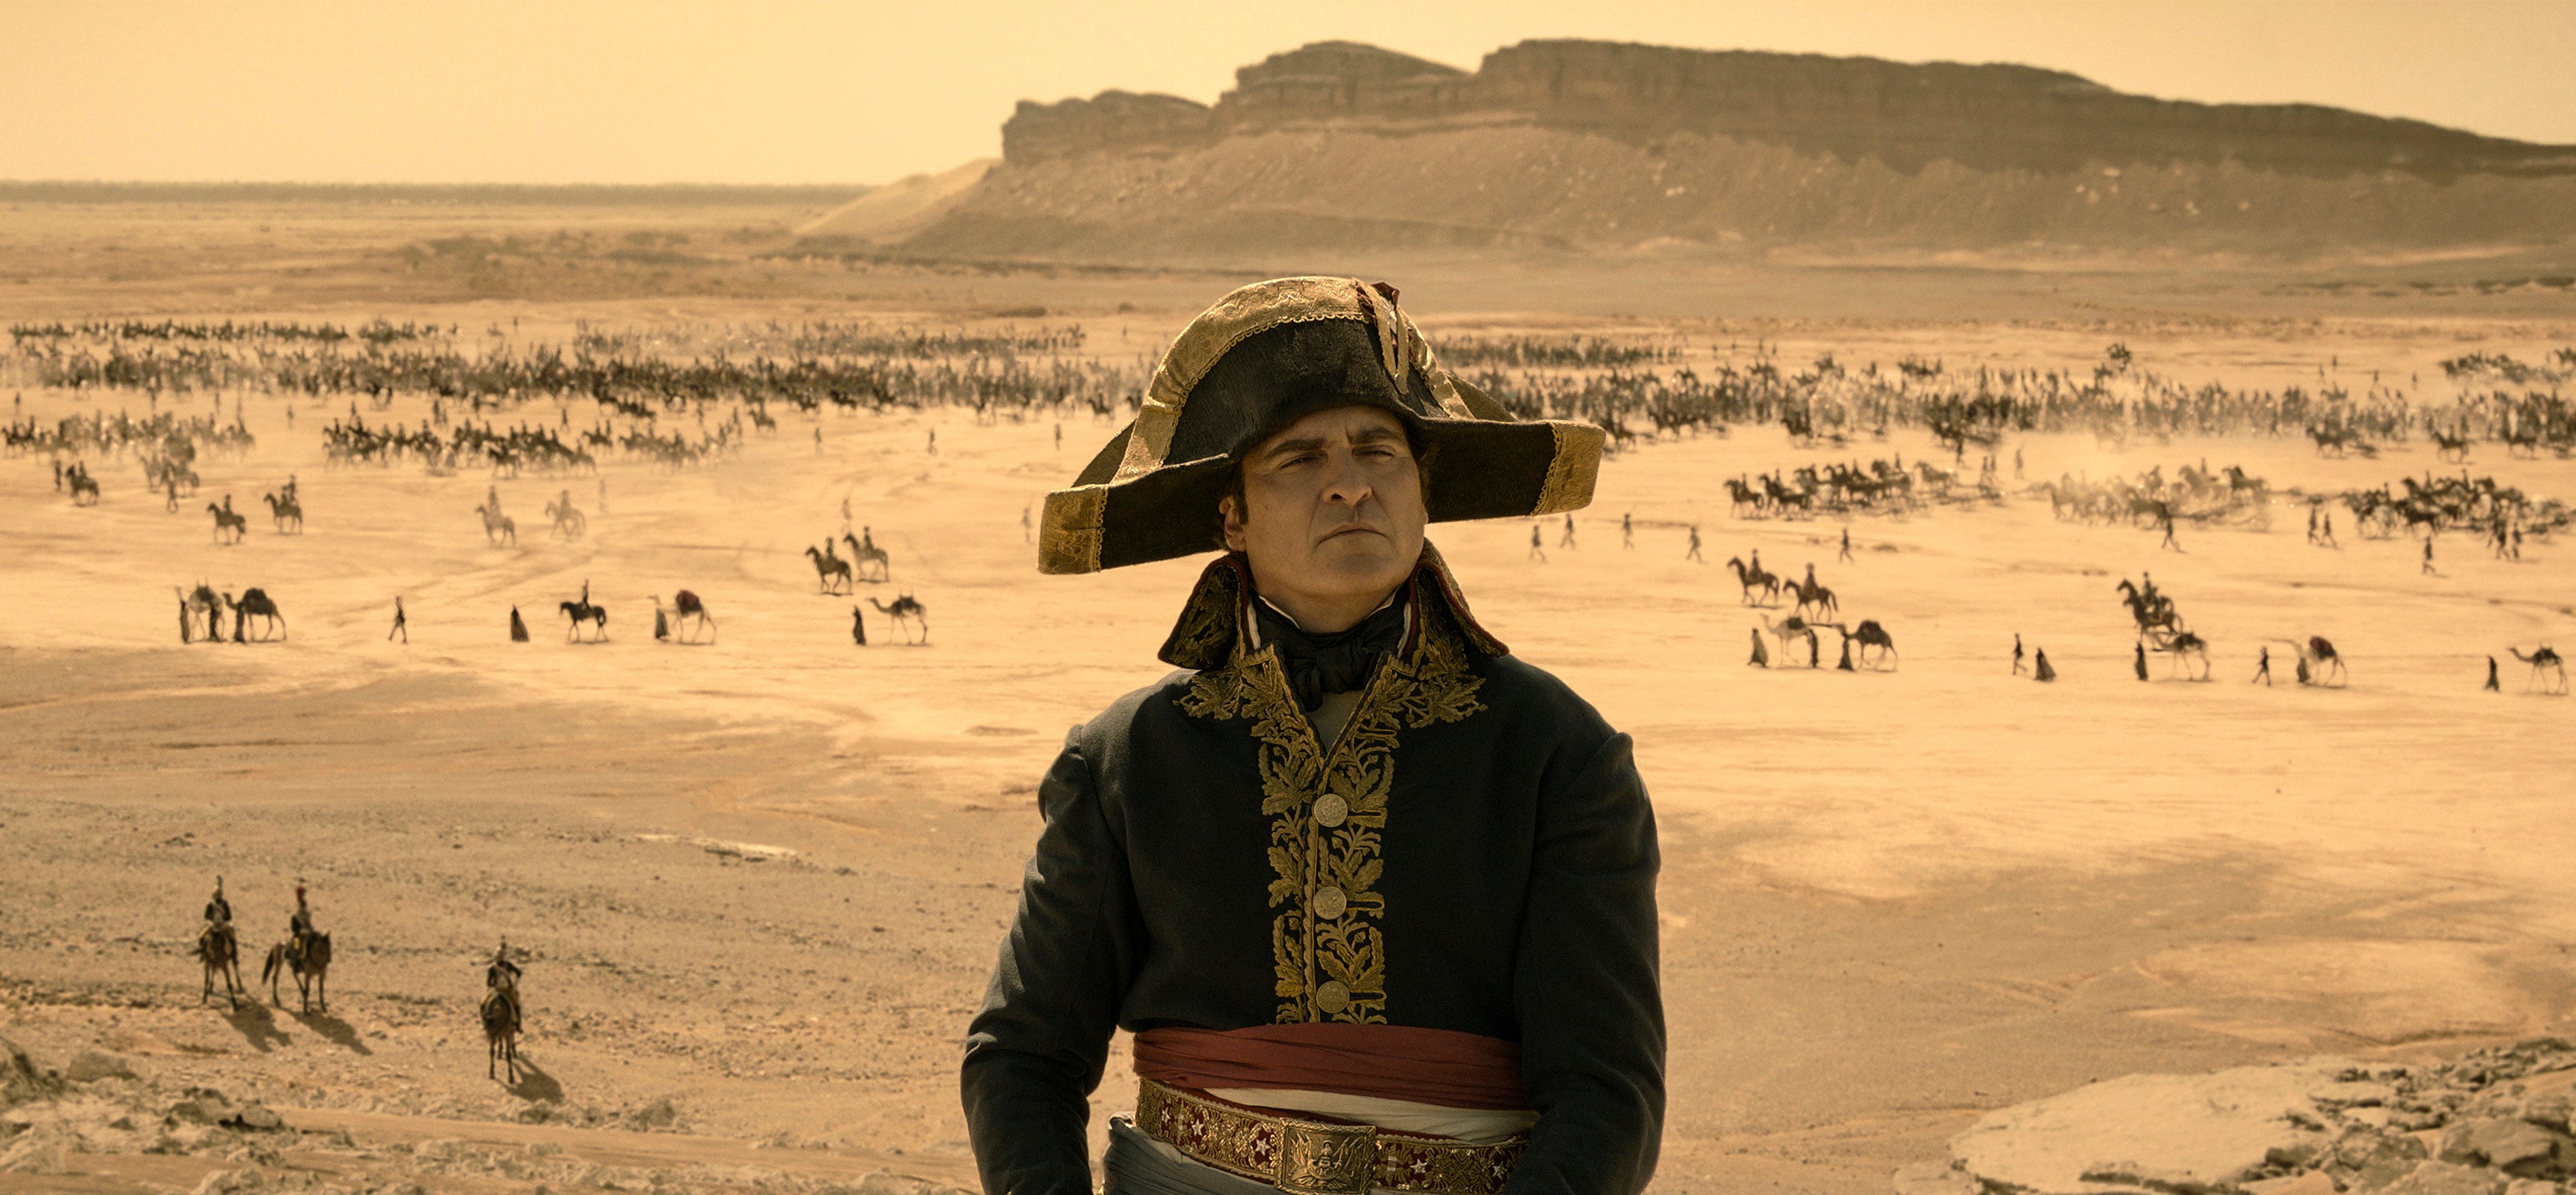 Desert storm: Joaquin Phoenix in a scene from Ridley Scott’s historical drama ‘Napoleon’, which will be released in UK cinemas on 22 November